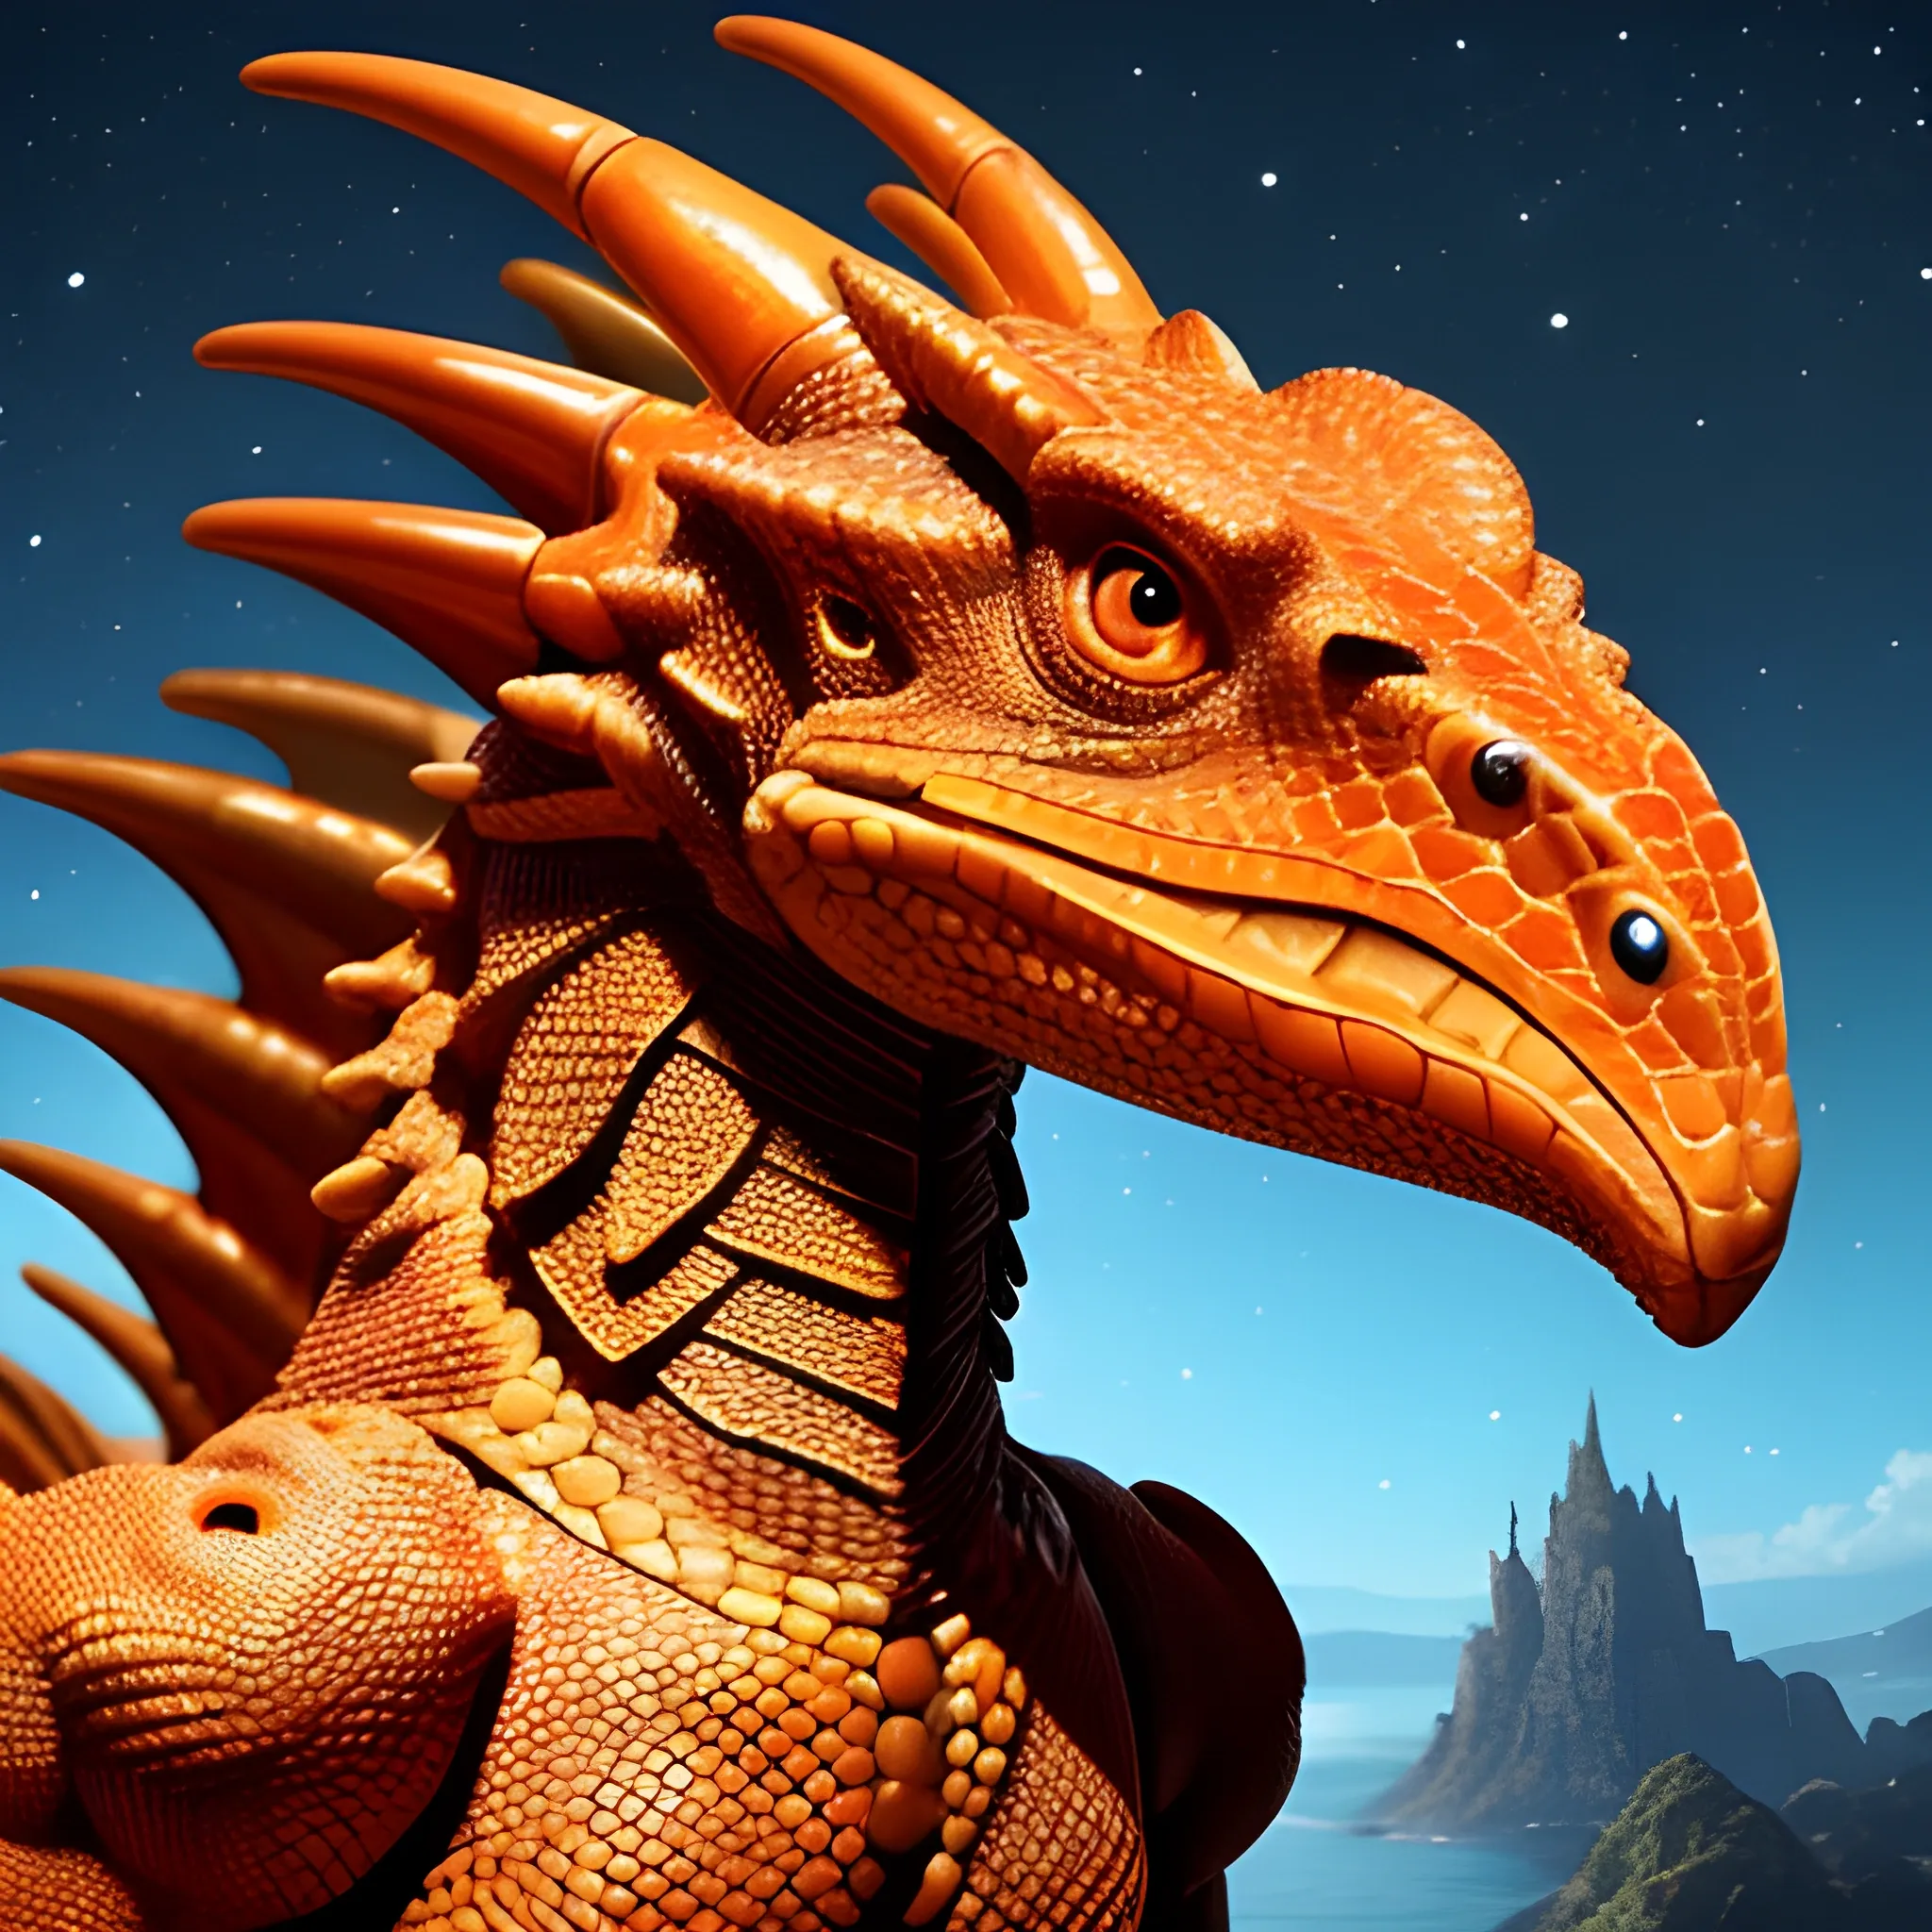 Humanoid dragon looking at the camera. He is orange-brown with a large beak. He is wearing a simple blue cloak that has stars on it. He does not have horns, and has a more lizard like face. Fantasy